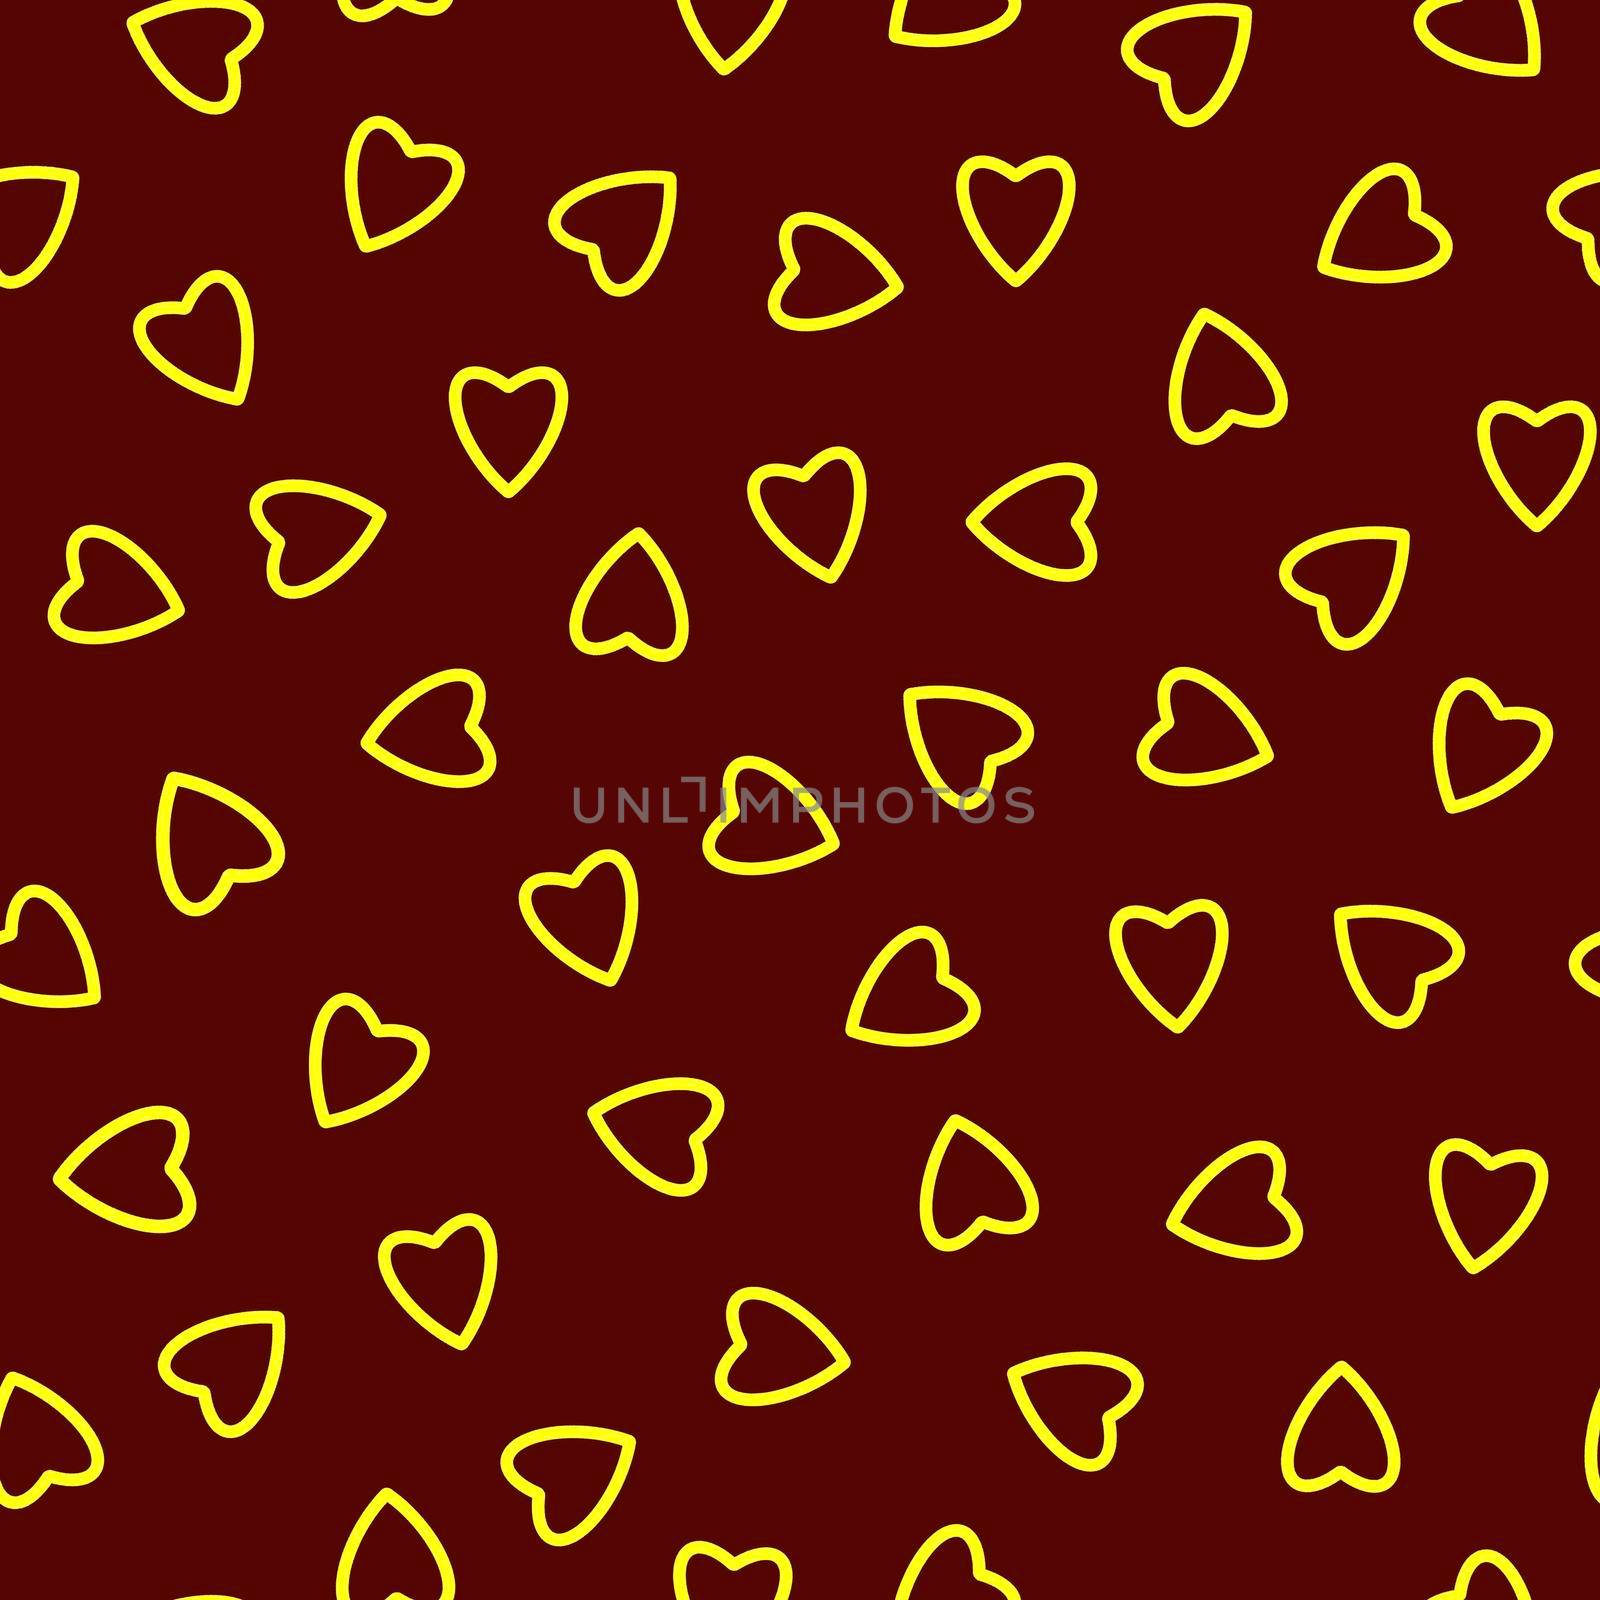 Simple hearts seamless pattern,endless chaotic texture made tiny heart silhouettes.Valentines,mothers day background.Great for Easter,wedding,scrapbook,gift wrapping paper,textiles.Yellow on burgundy.